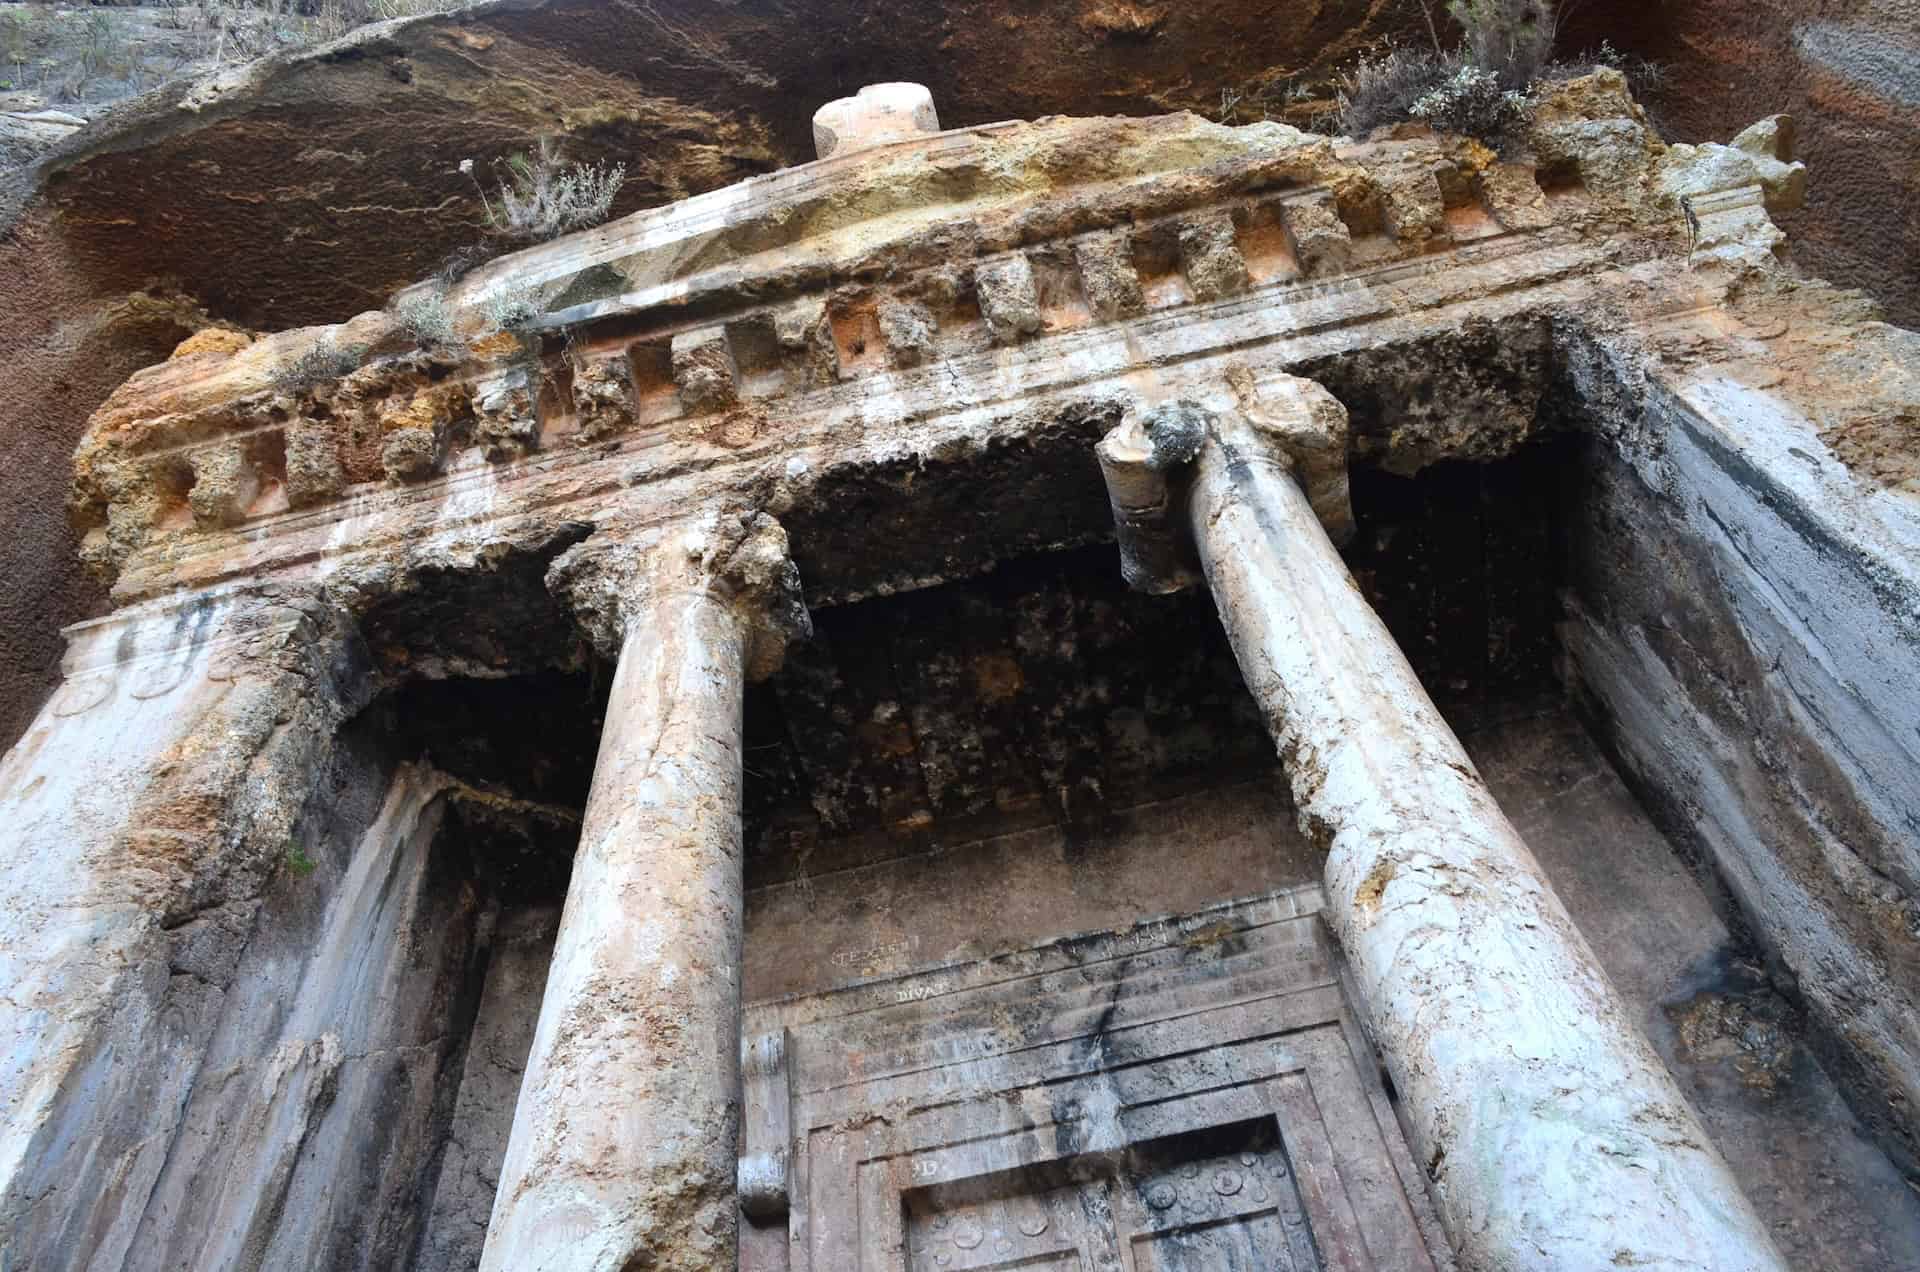 Tomb of Amyntas at the Amyntas Rock Tombs in Fethiye, Turkey